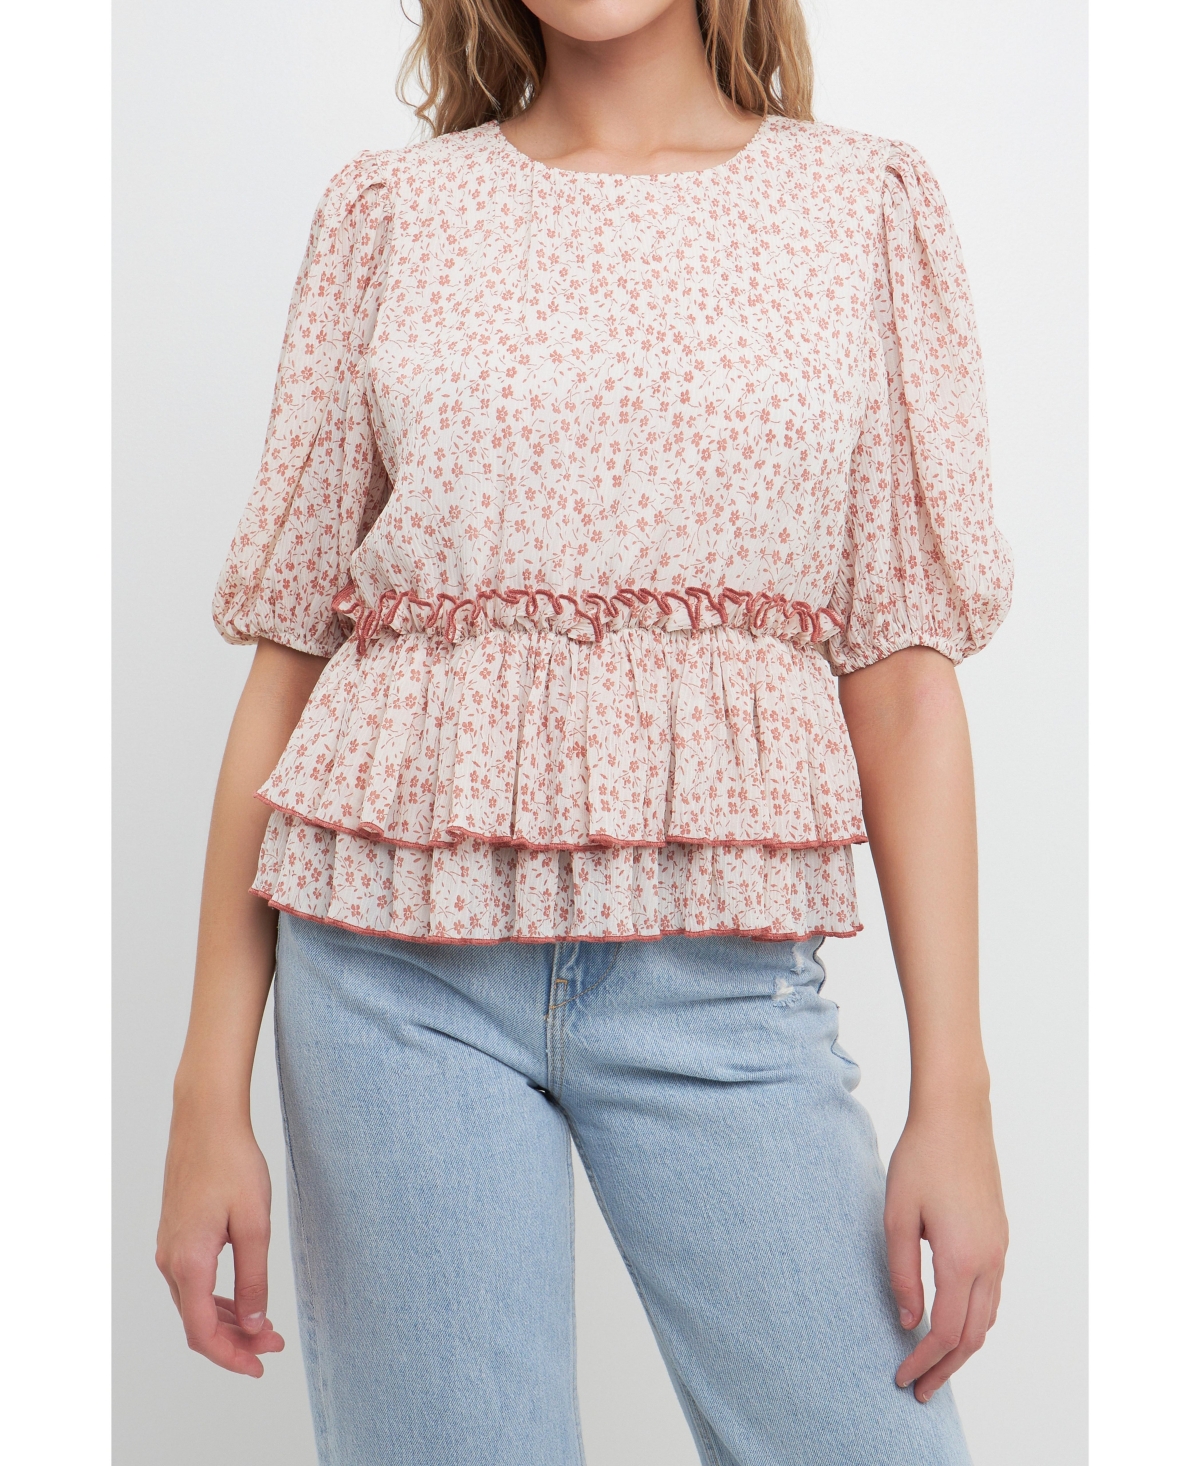 Women's Pleated Floral Top - White